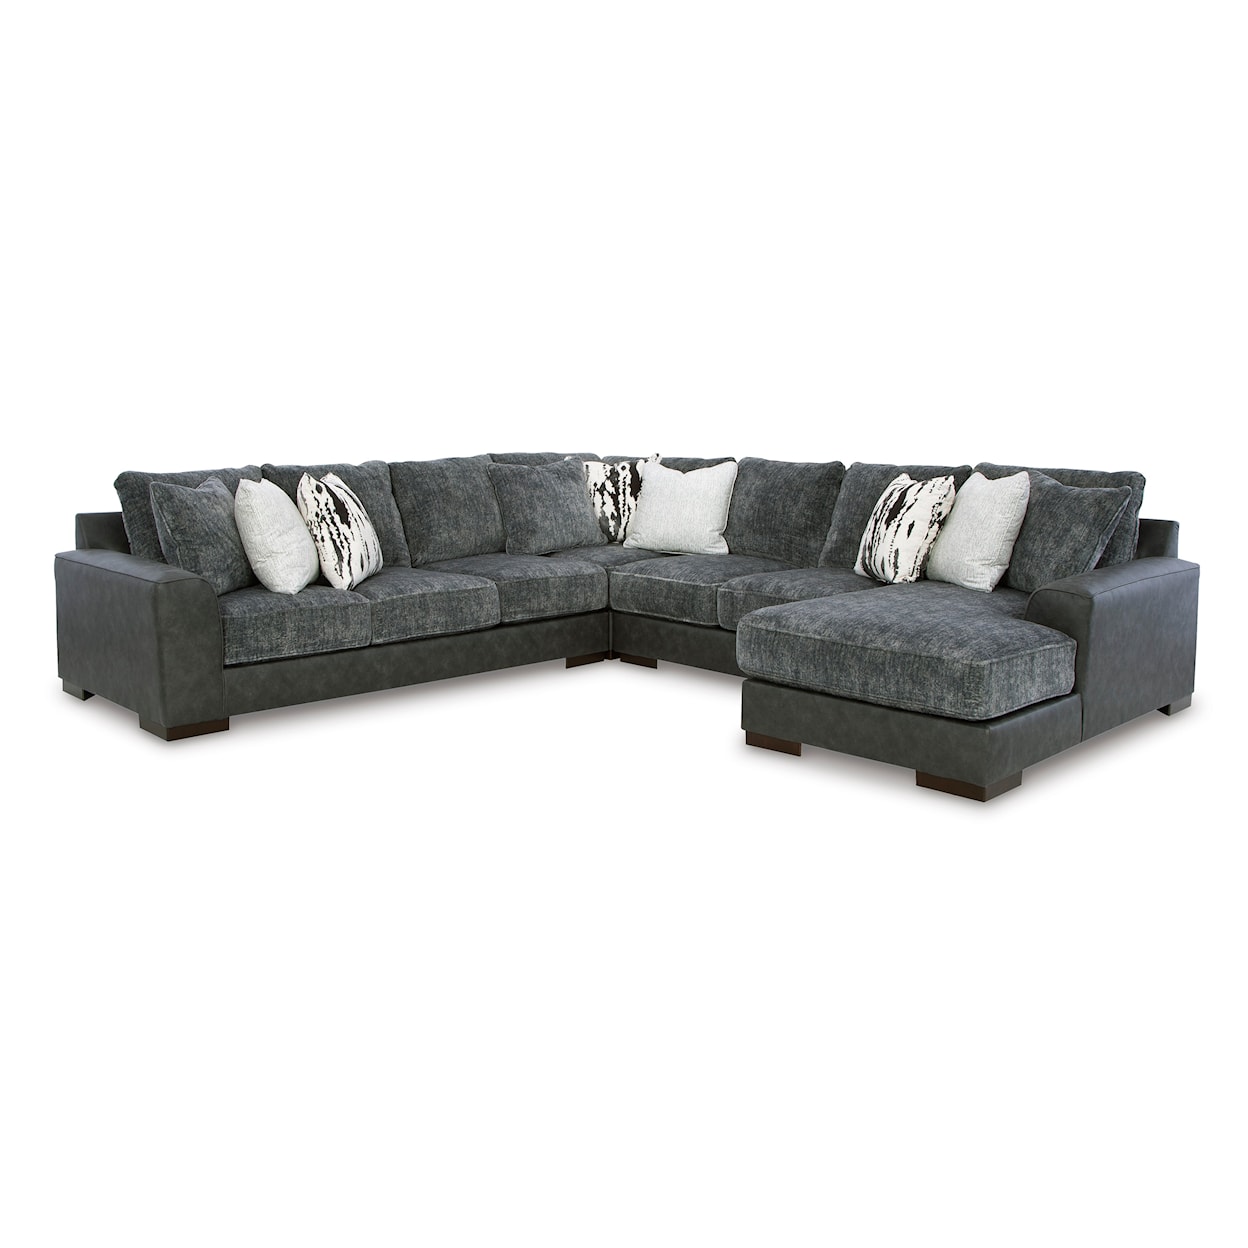 StyleLine Larkstone Sectional Sofa with Chaise